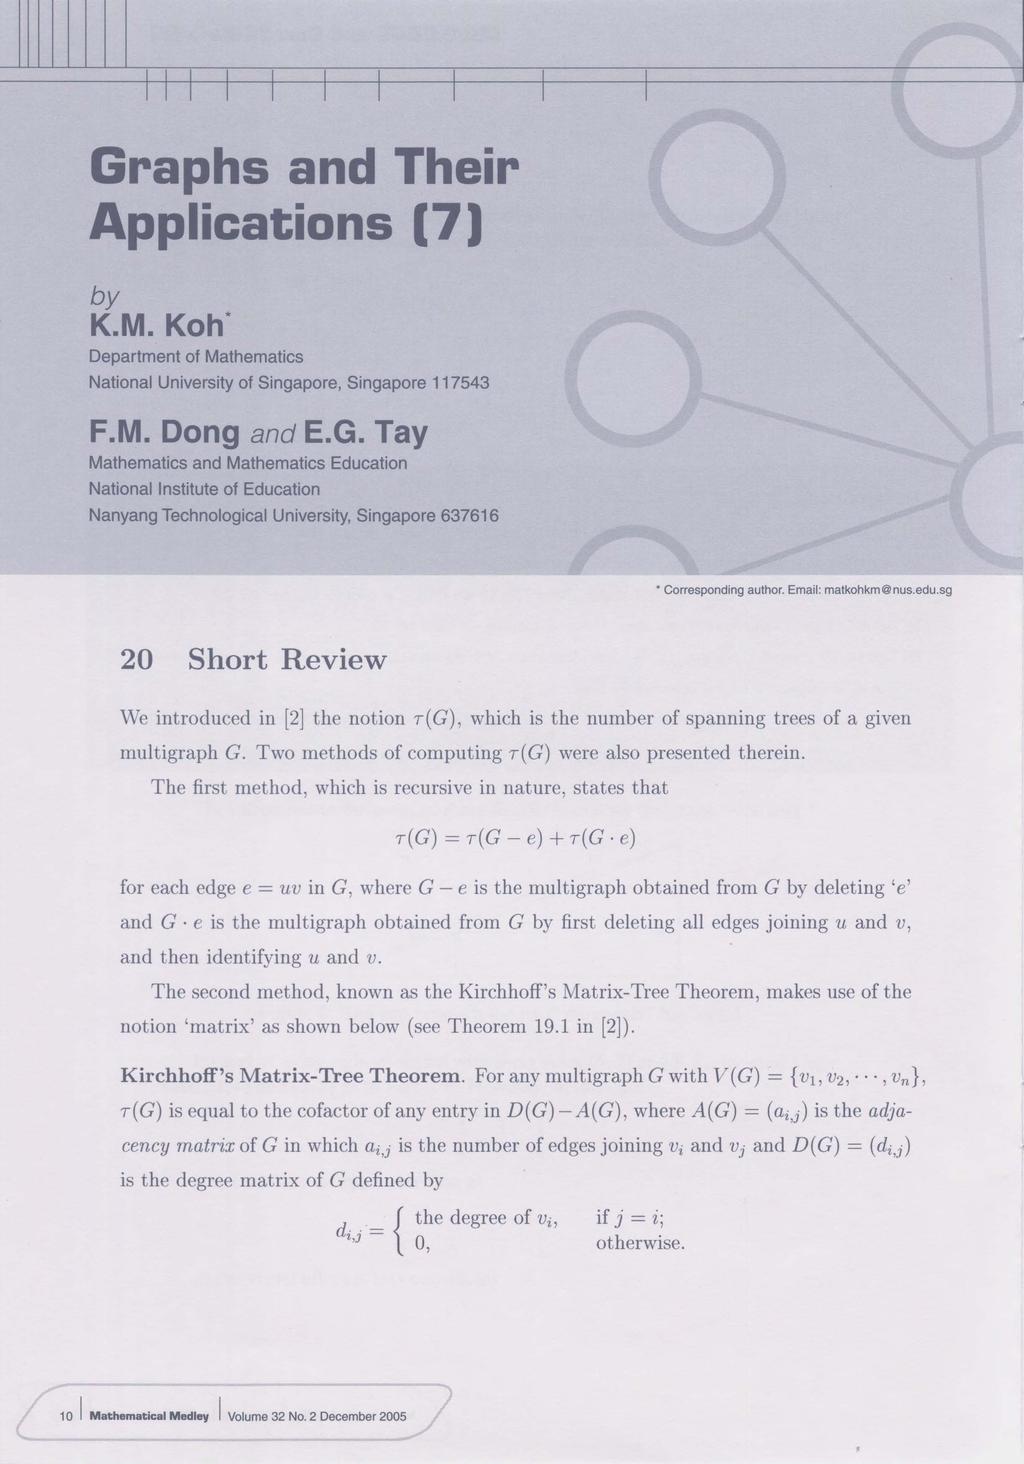 11111111 I I I Graphs and Their Applications (7) by K.M. Koh* Department of Mathematics National University of Singapore, Singapore 117543 F.M. Dong and E.G. Tay Mathematics and Mathematics Education National Institute of Education Nanyang Technological University, Singapore 637616 *Corresponding author.